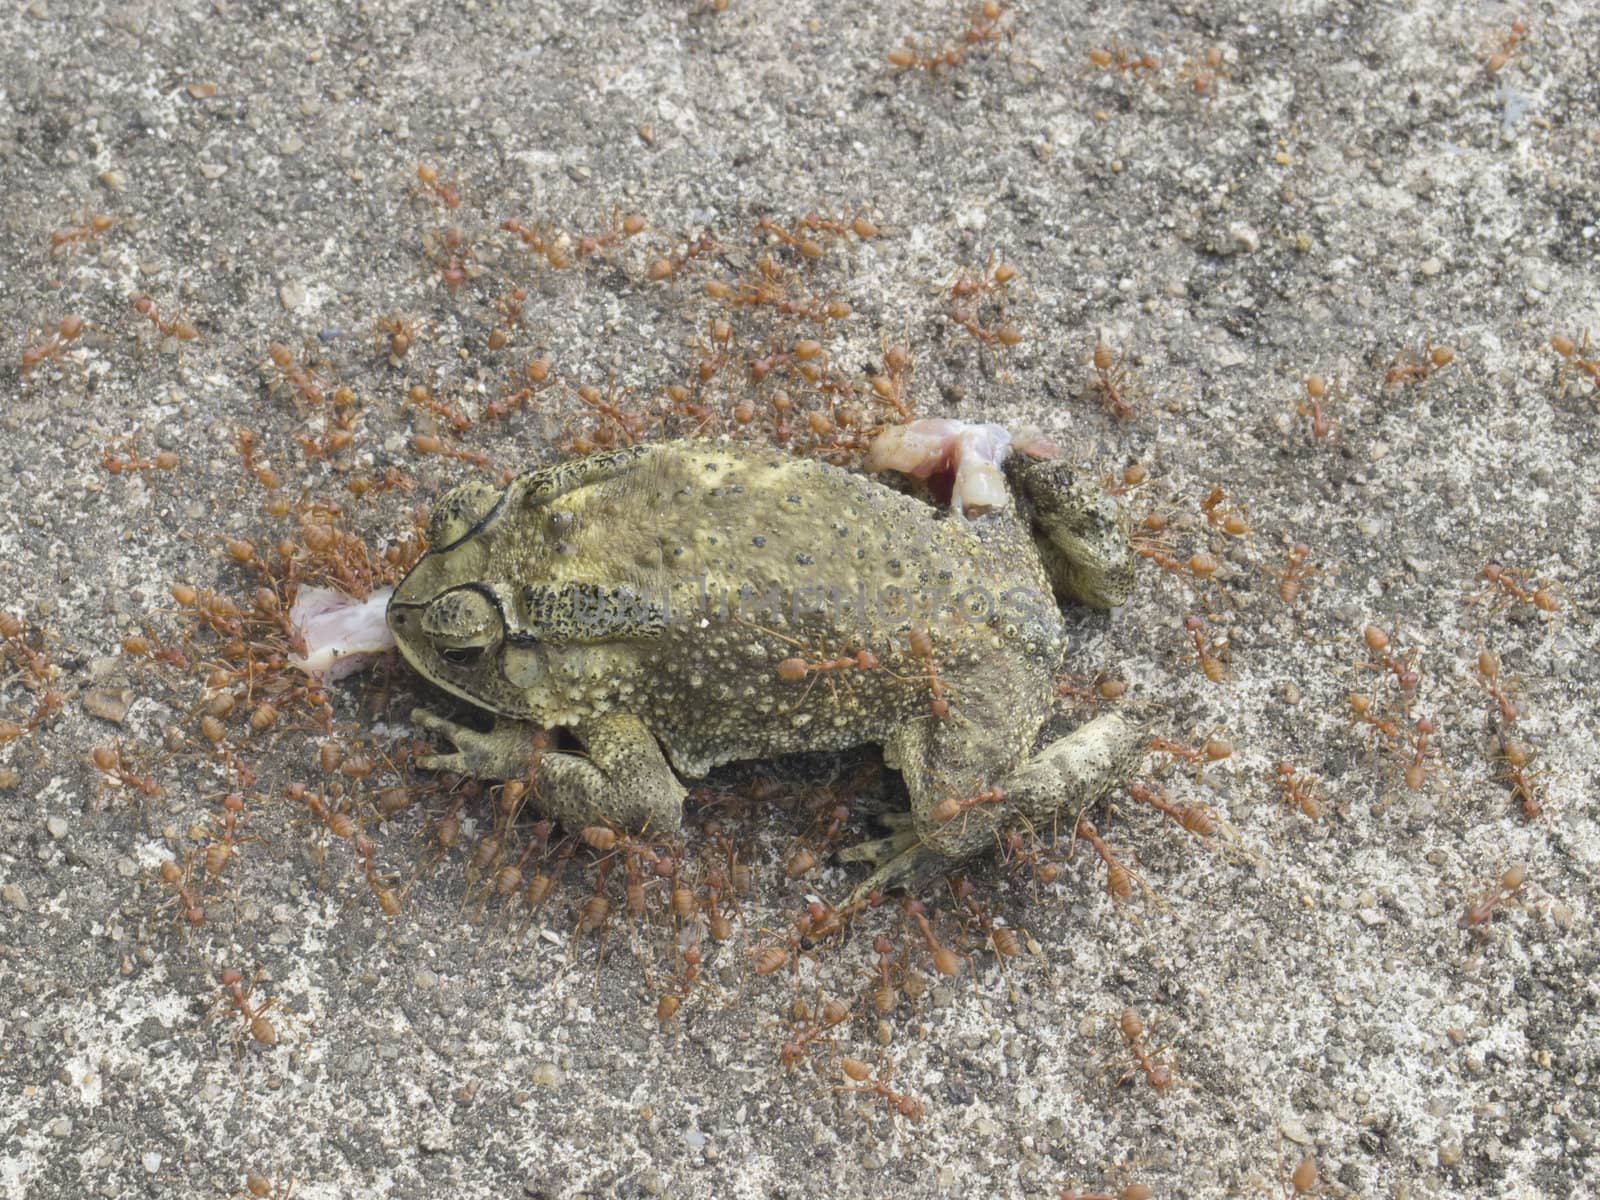 Red ant eating dead toad on the ground